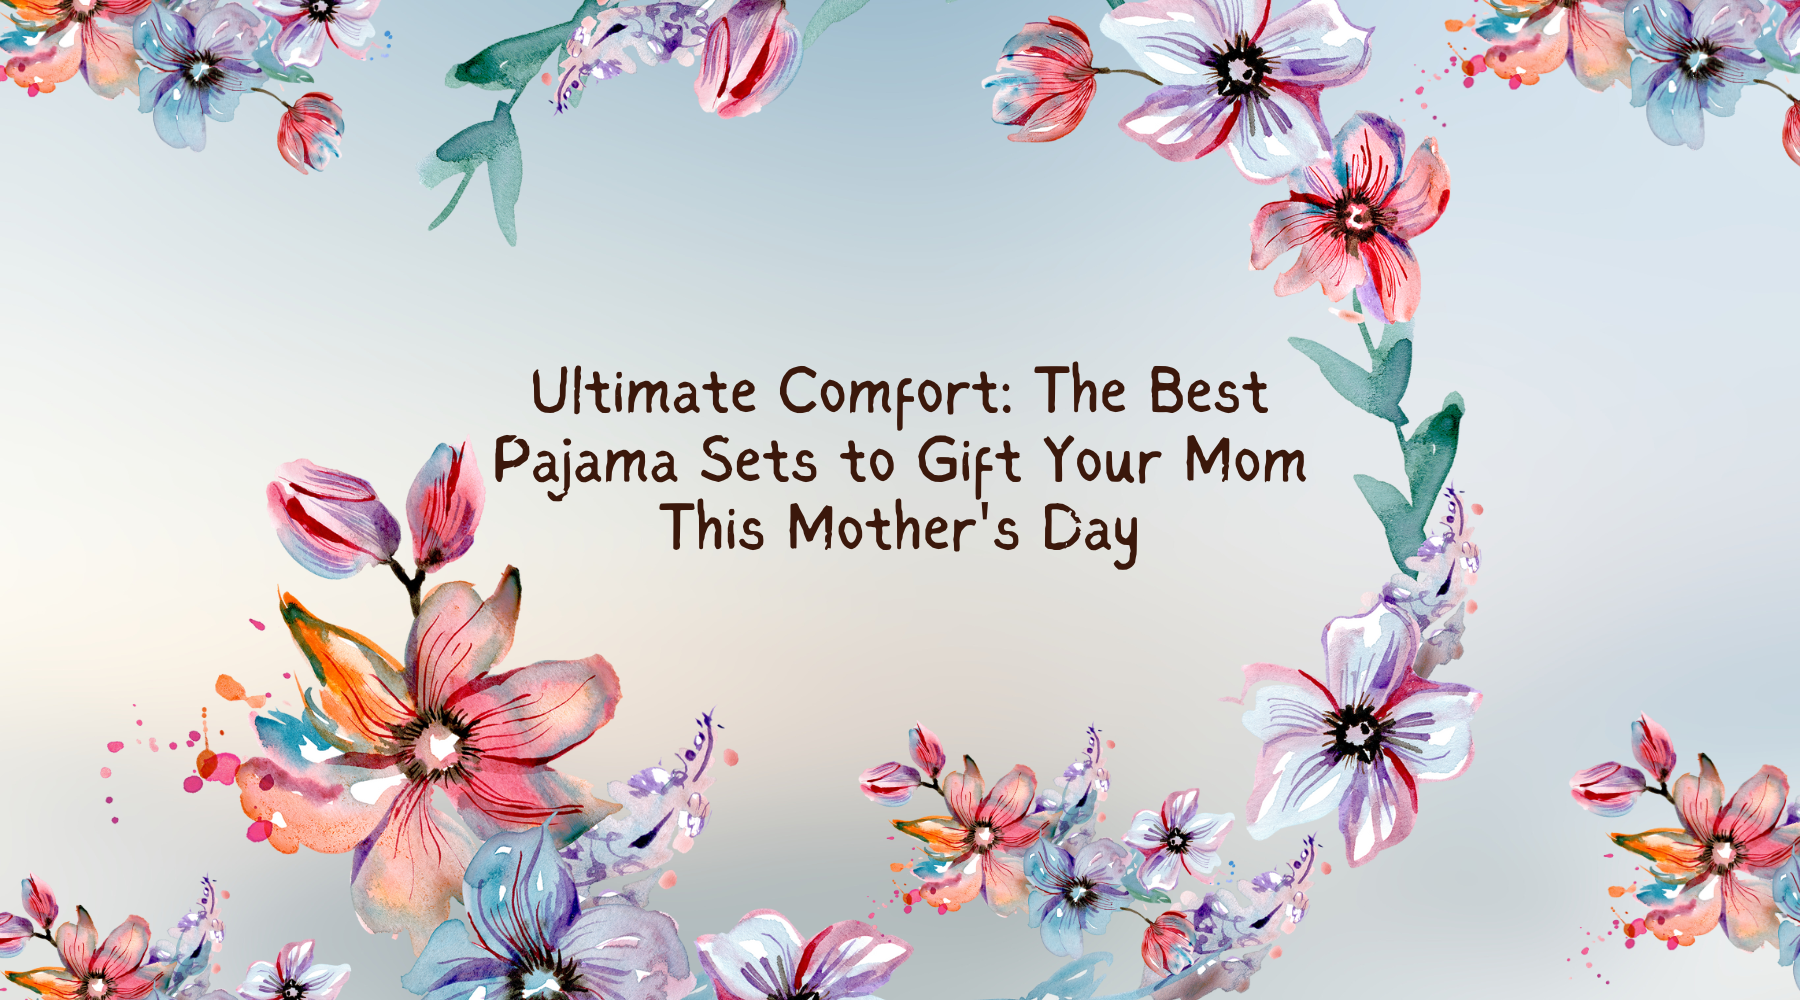 Ultimate Comfort: The Best Pajama Sets to Gift Your Mom This Mother's Day